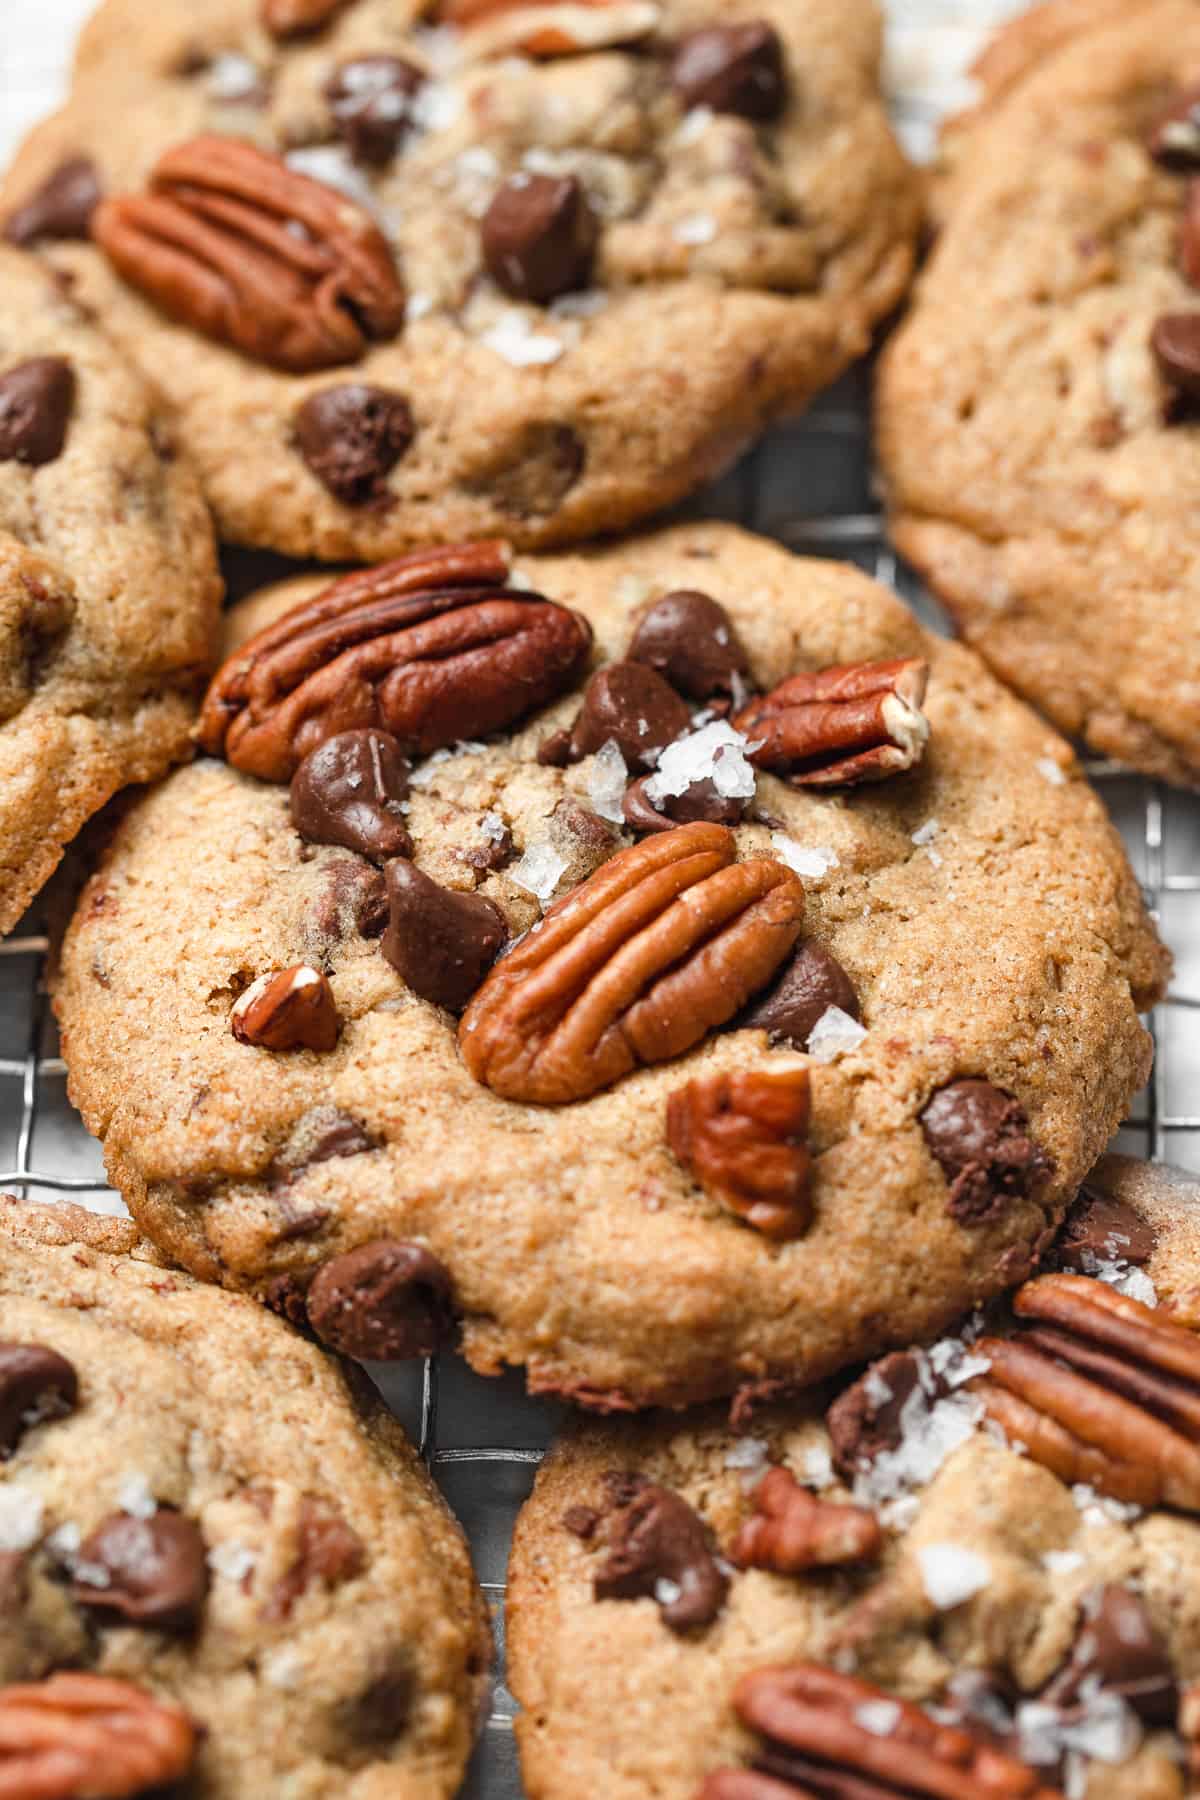 A close up of a brown butter chocolate chip cookie with pecans.